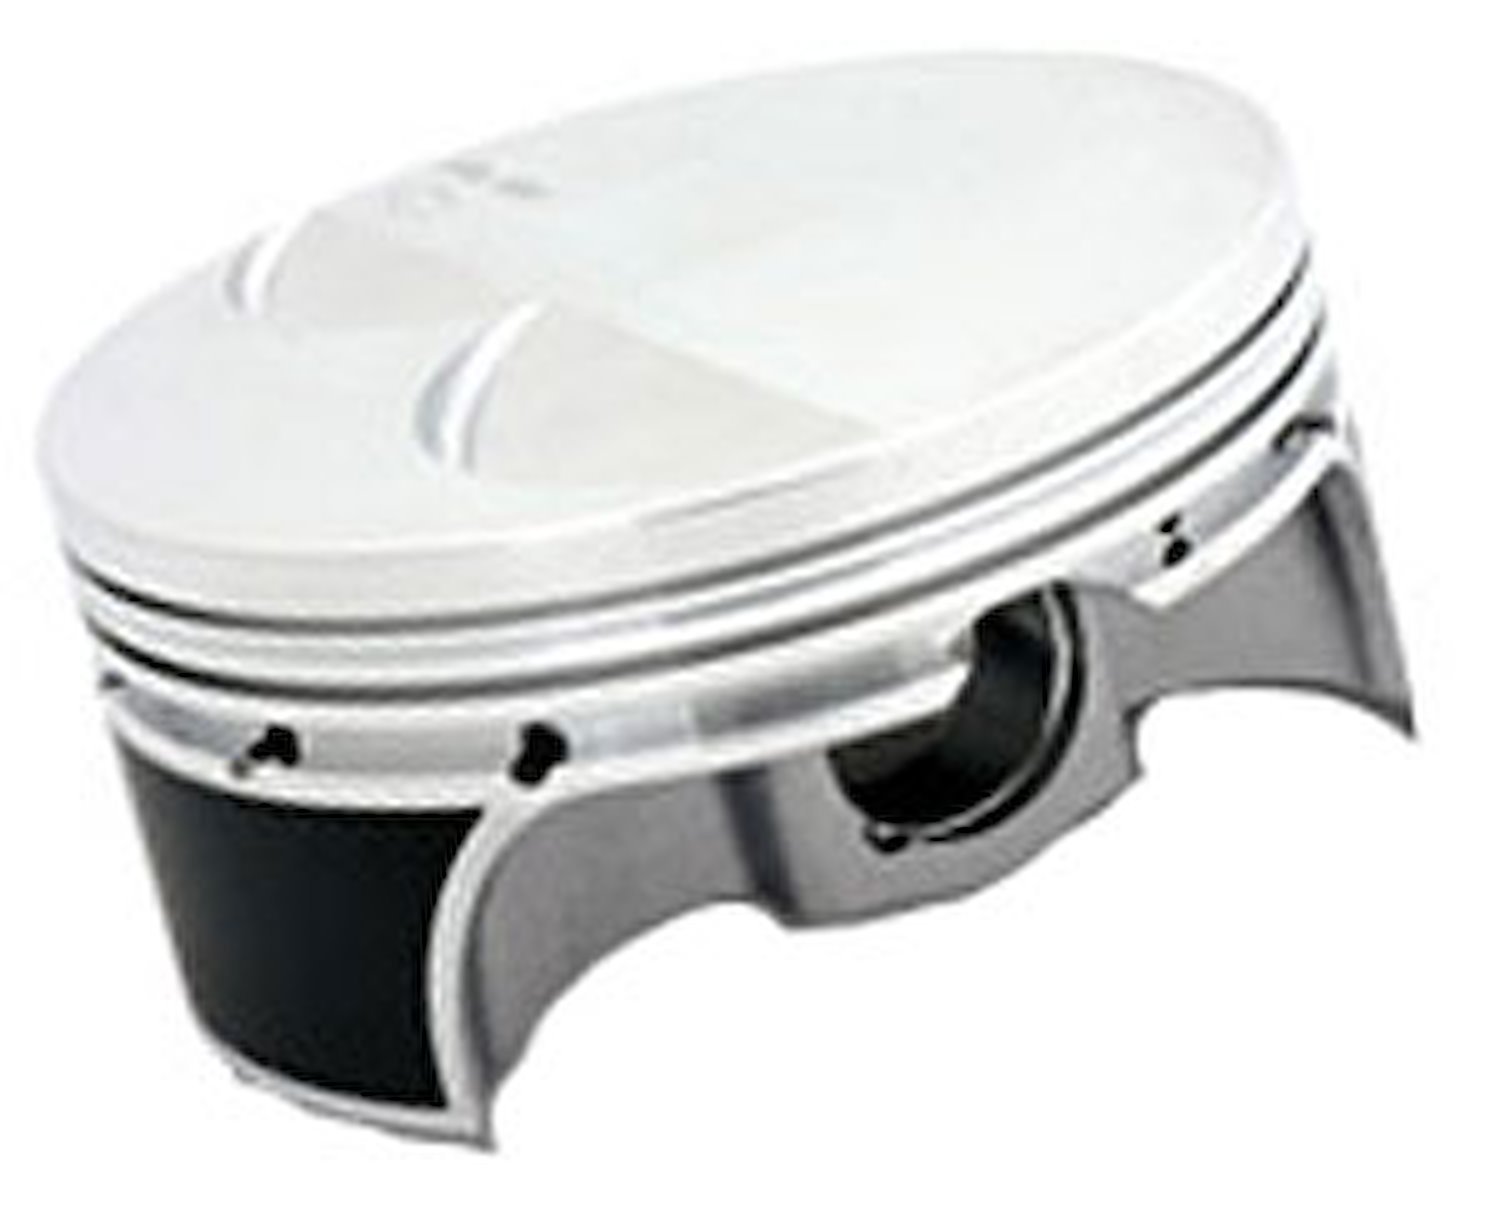 Professional Series Flat Top Pistons SB-Chevy 350 Bore: 4.030"